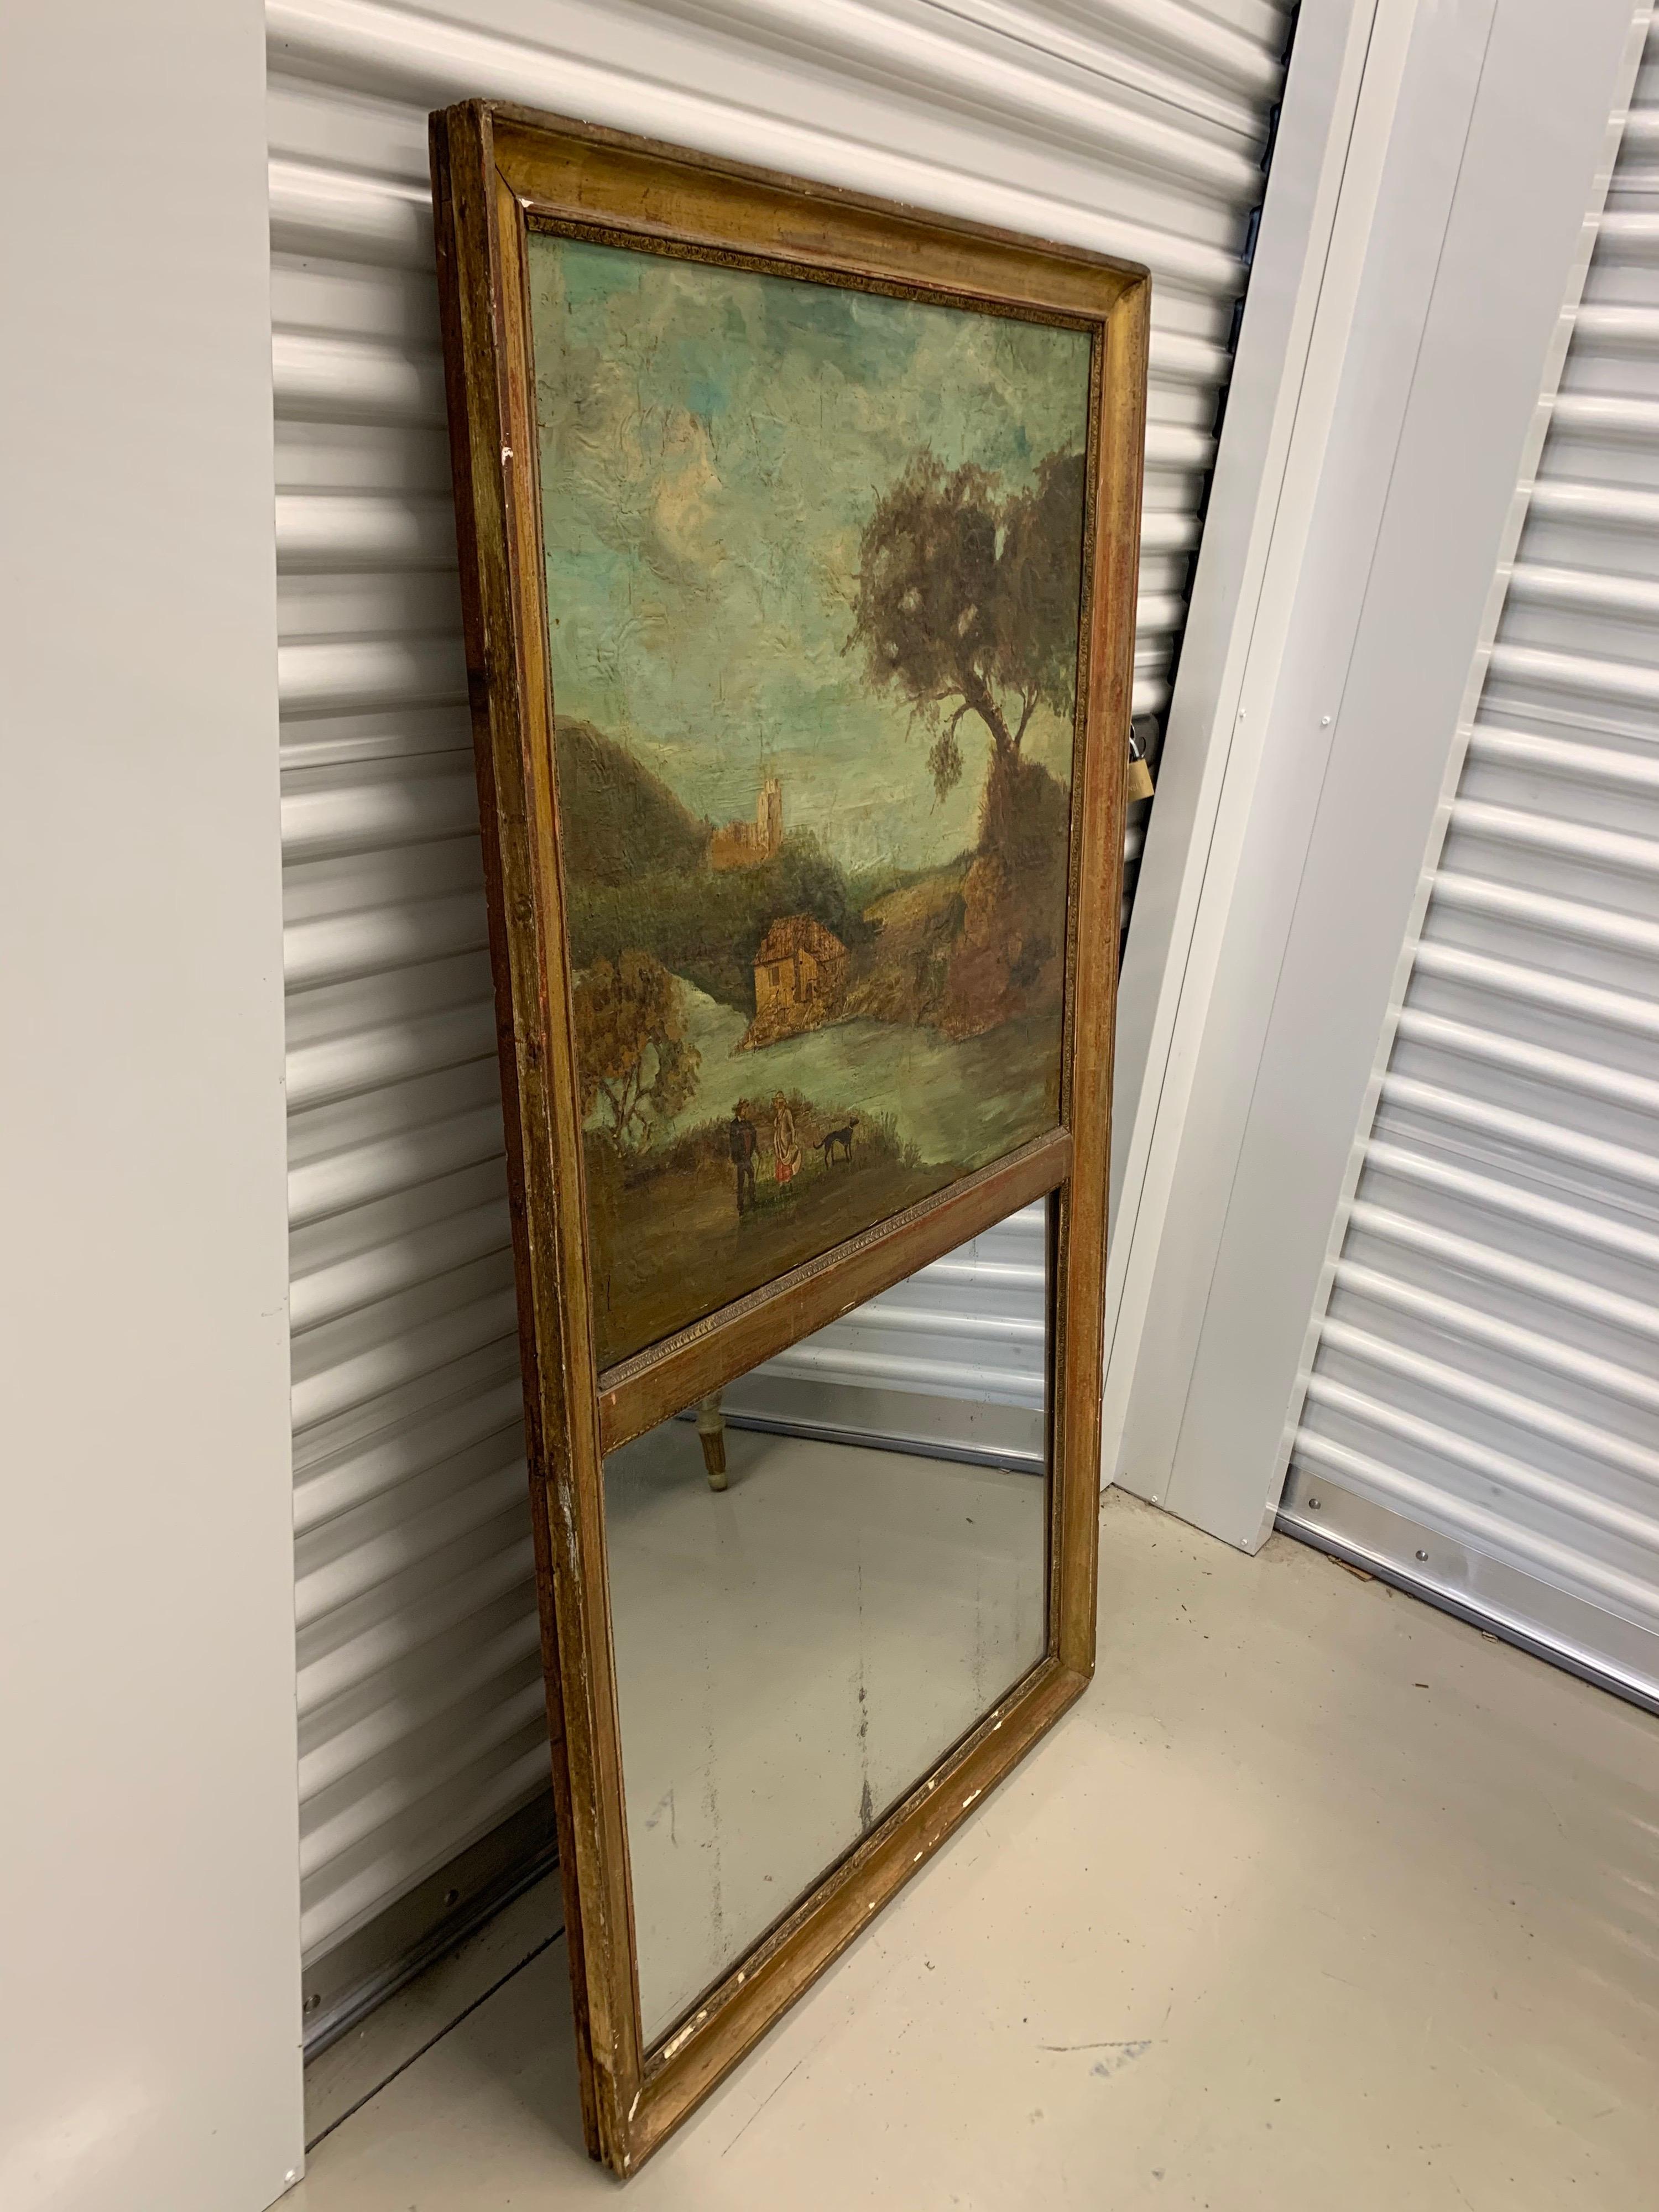 Early Nineteenth Century French Trumeau Antique Gilt Mirror Painting on Canvas 1